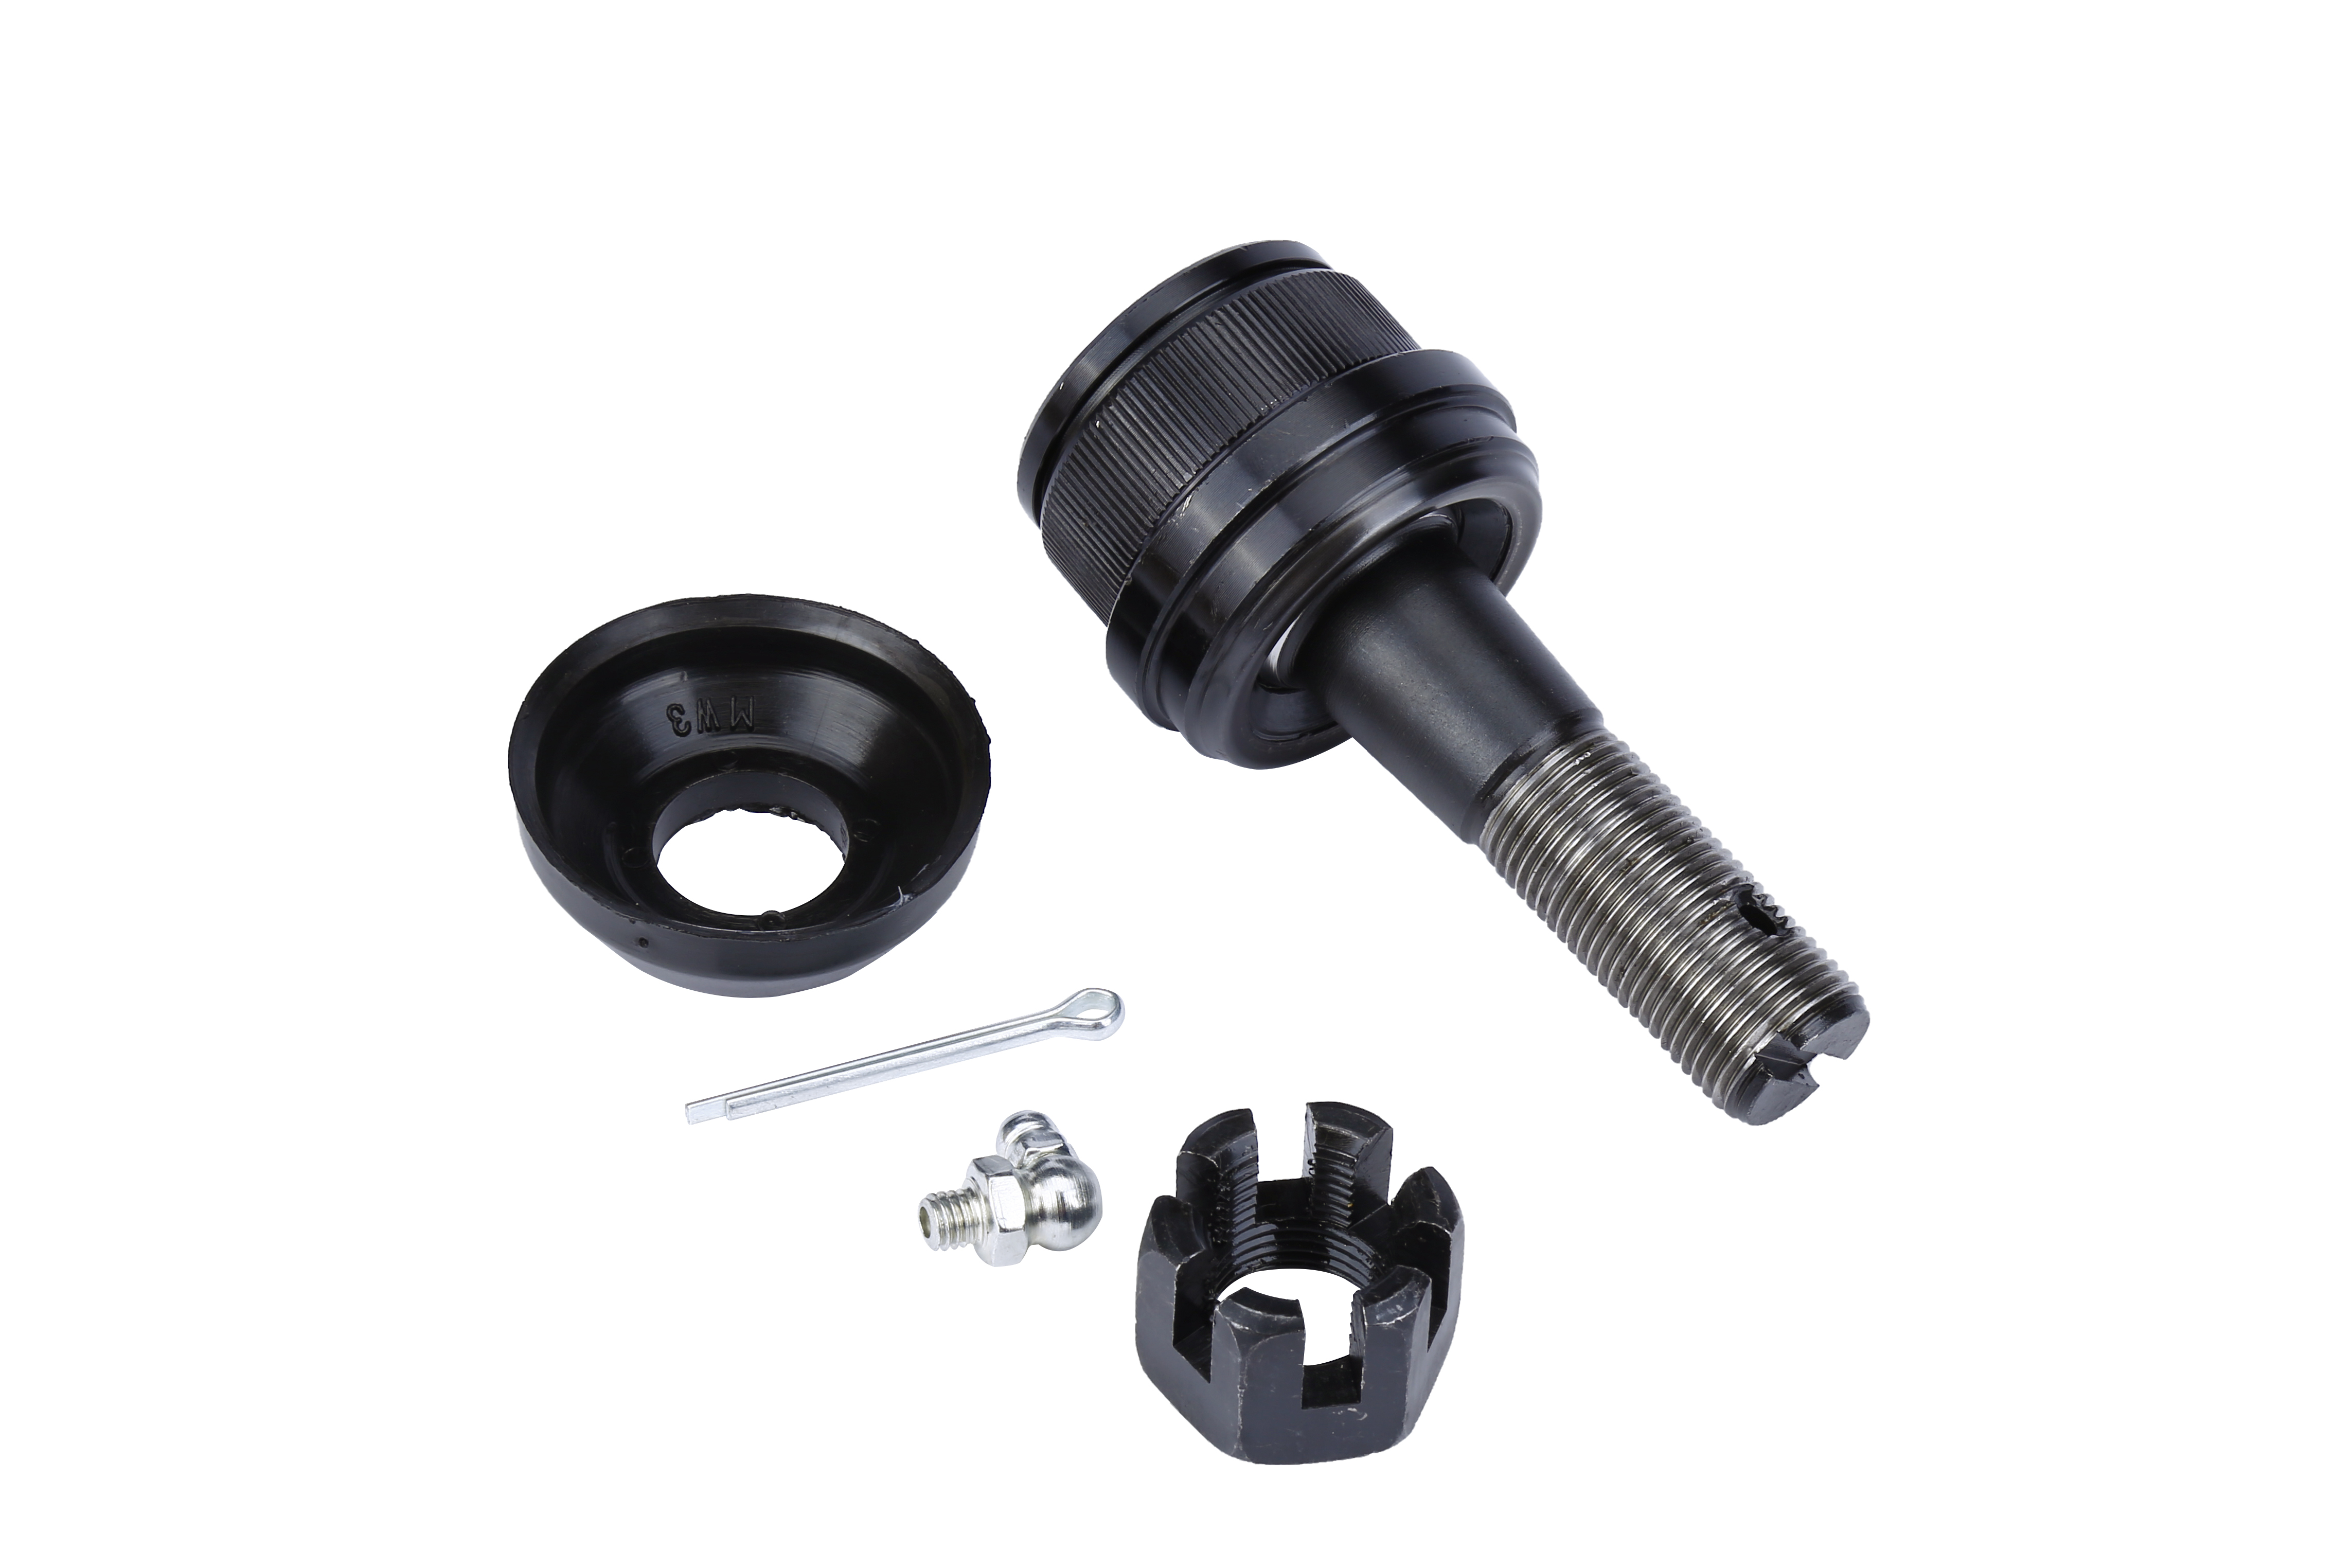 Front Outer Upper Ball Joint Kit - Replaces K80026 - Fit Ford & Dodge Trucks Image